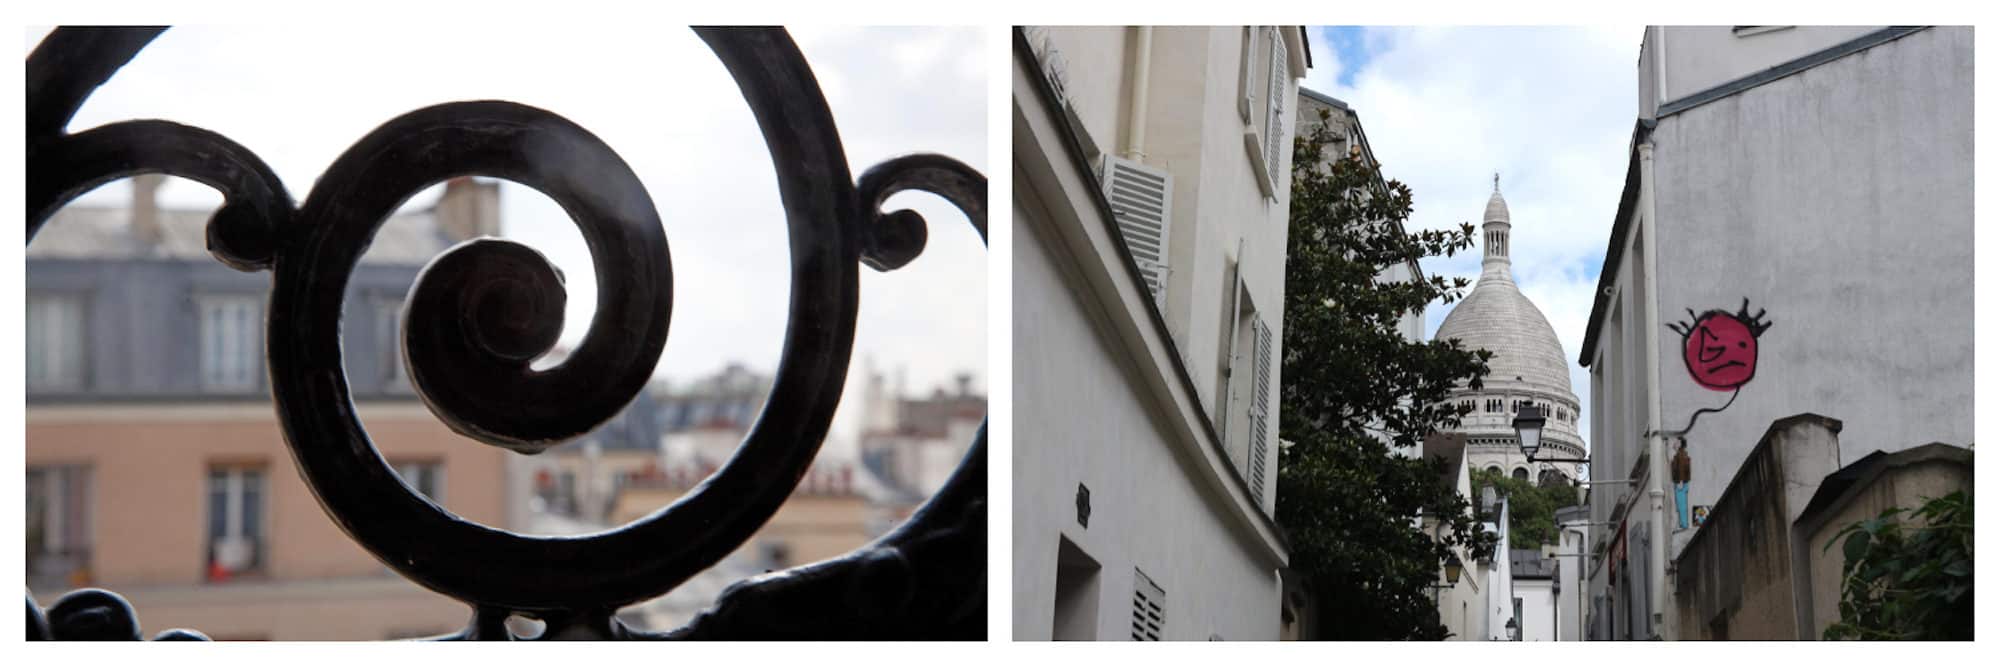 A detail in the wrought iron balcony of a Parisian apartment (left). A view of the Sacré Coeur Basilica at the end of a narrow lane, with a pink balloon painted on the right-hand wall (right).